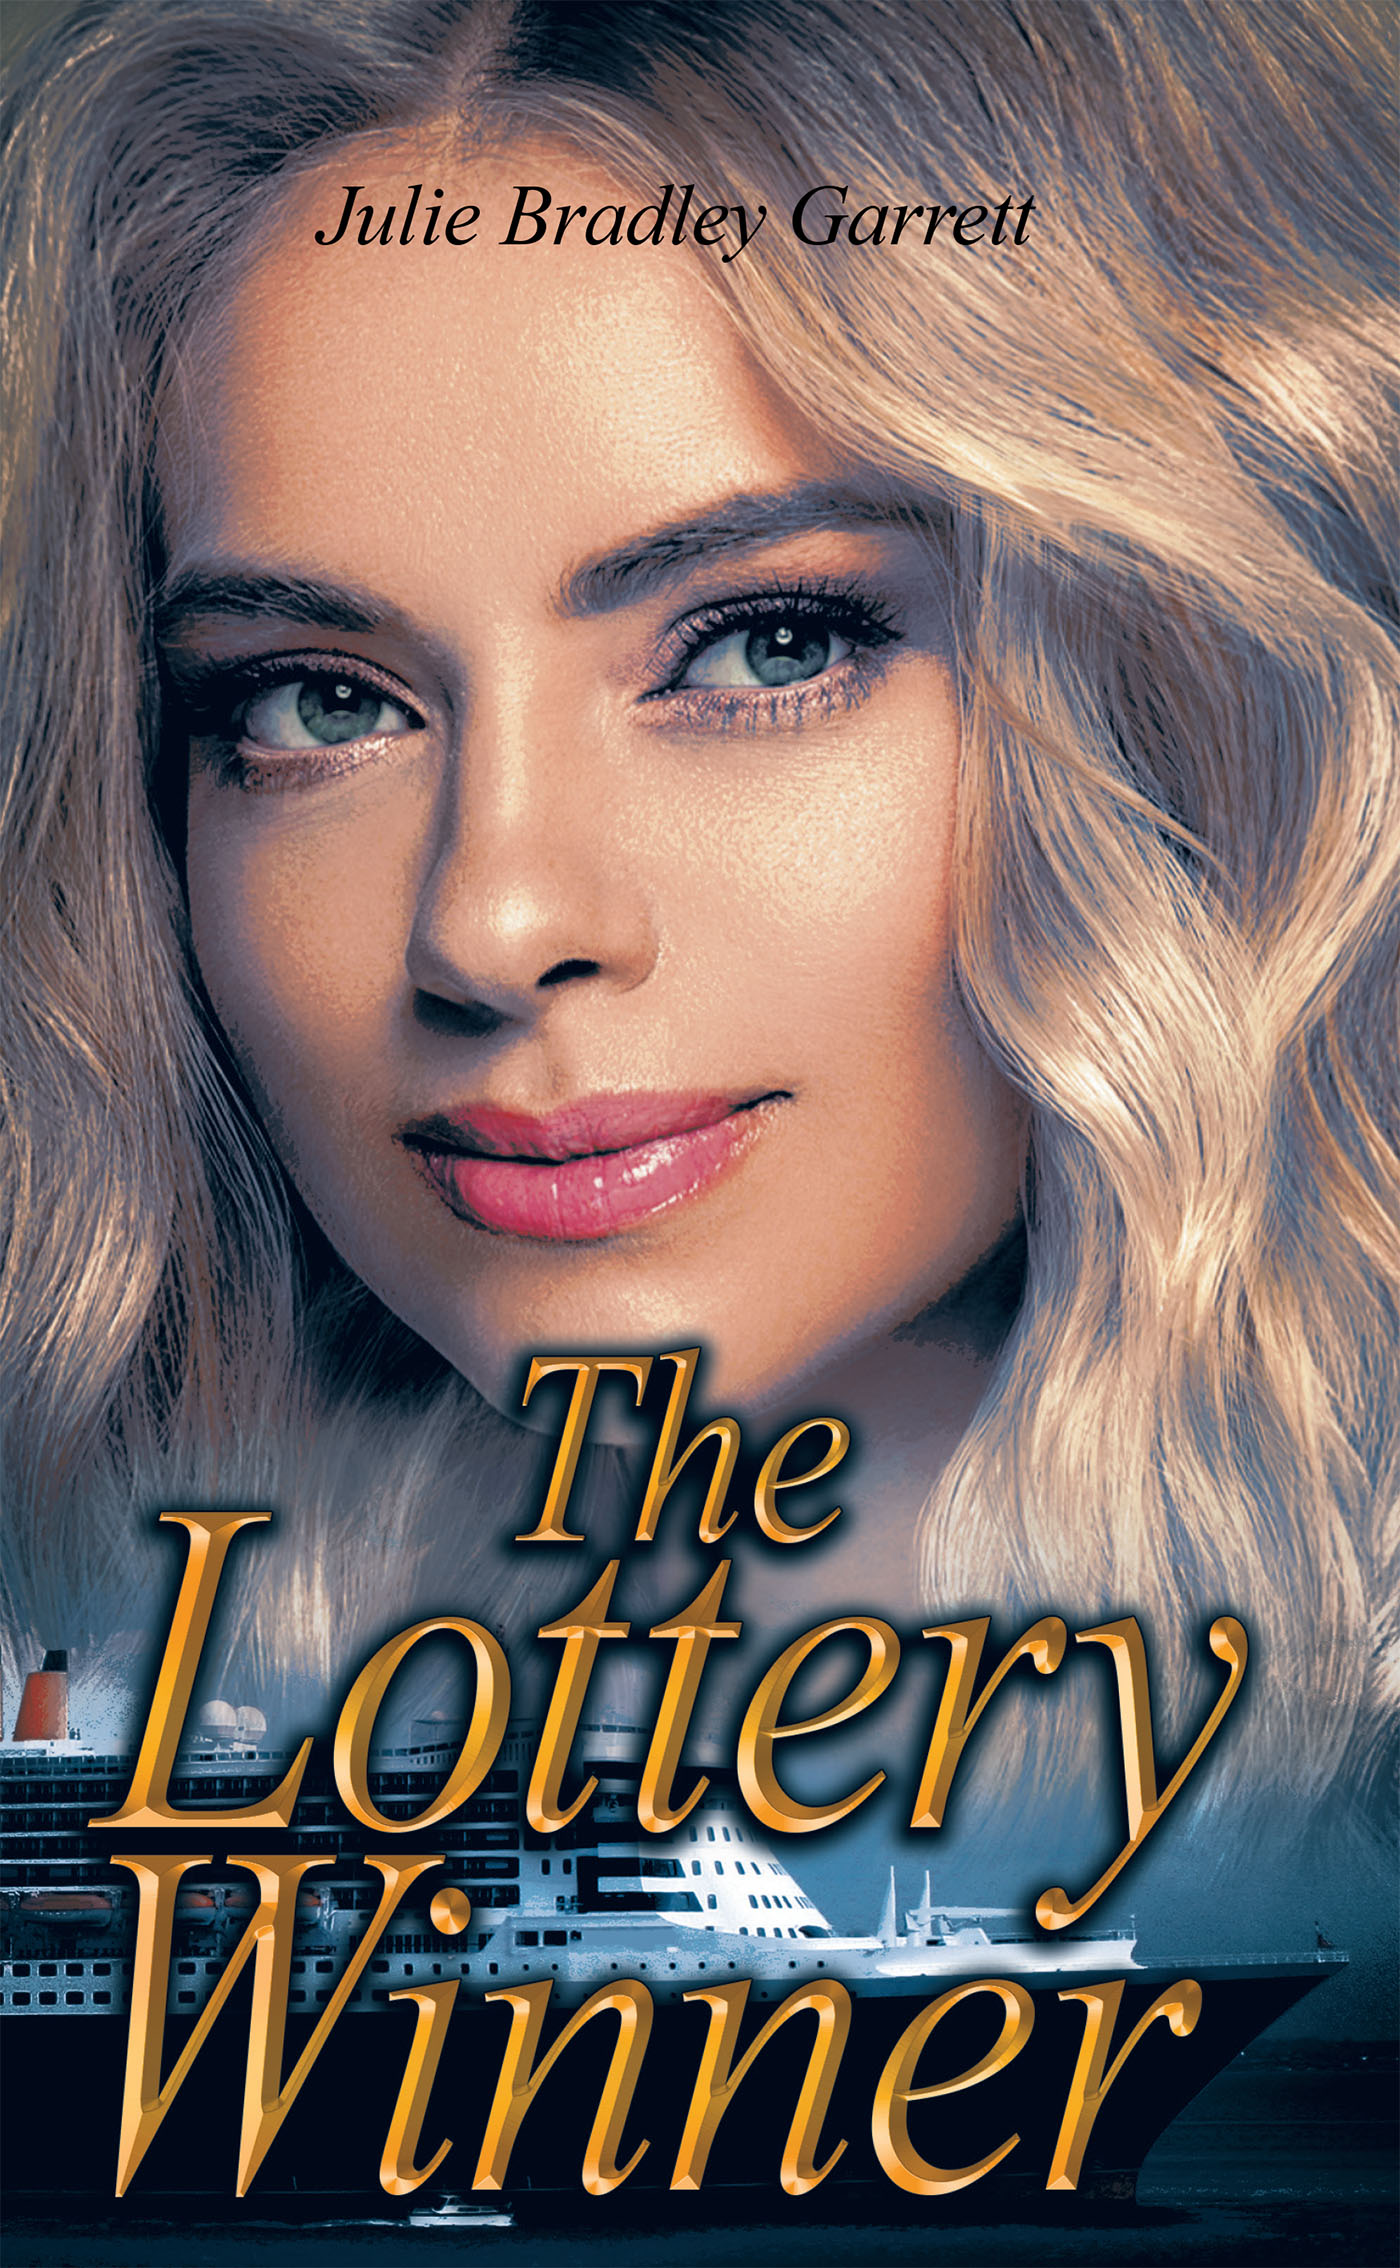 Author Julie Bradley Garrett’s New Book, "The Lottery Winner," is a Stirring Tale of a Young Woman Who Learns Important Lessons on Wealth, Life, and Happiness